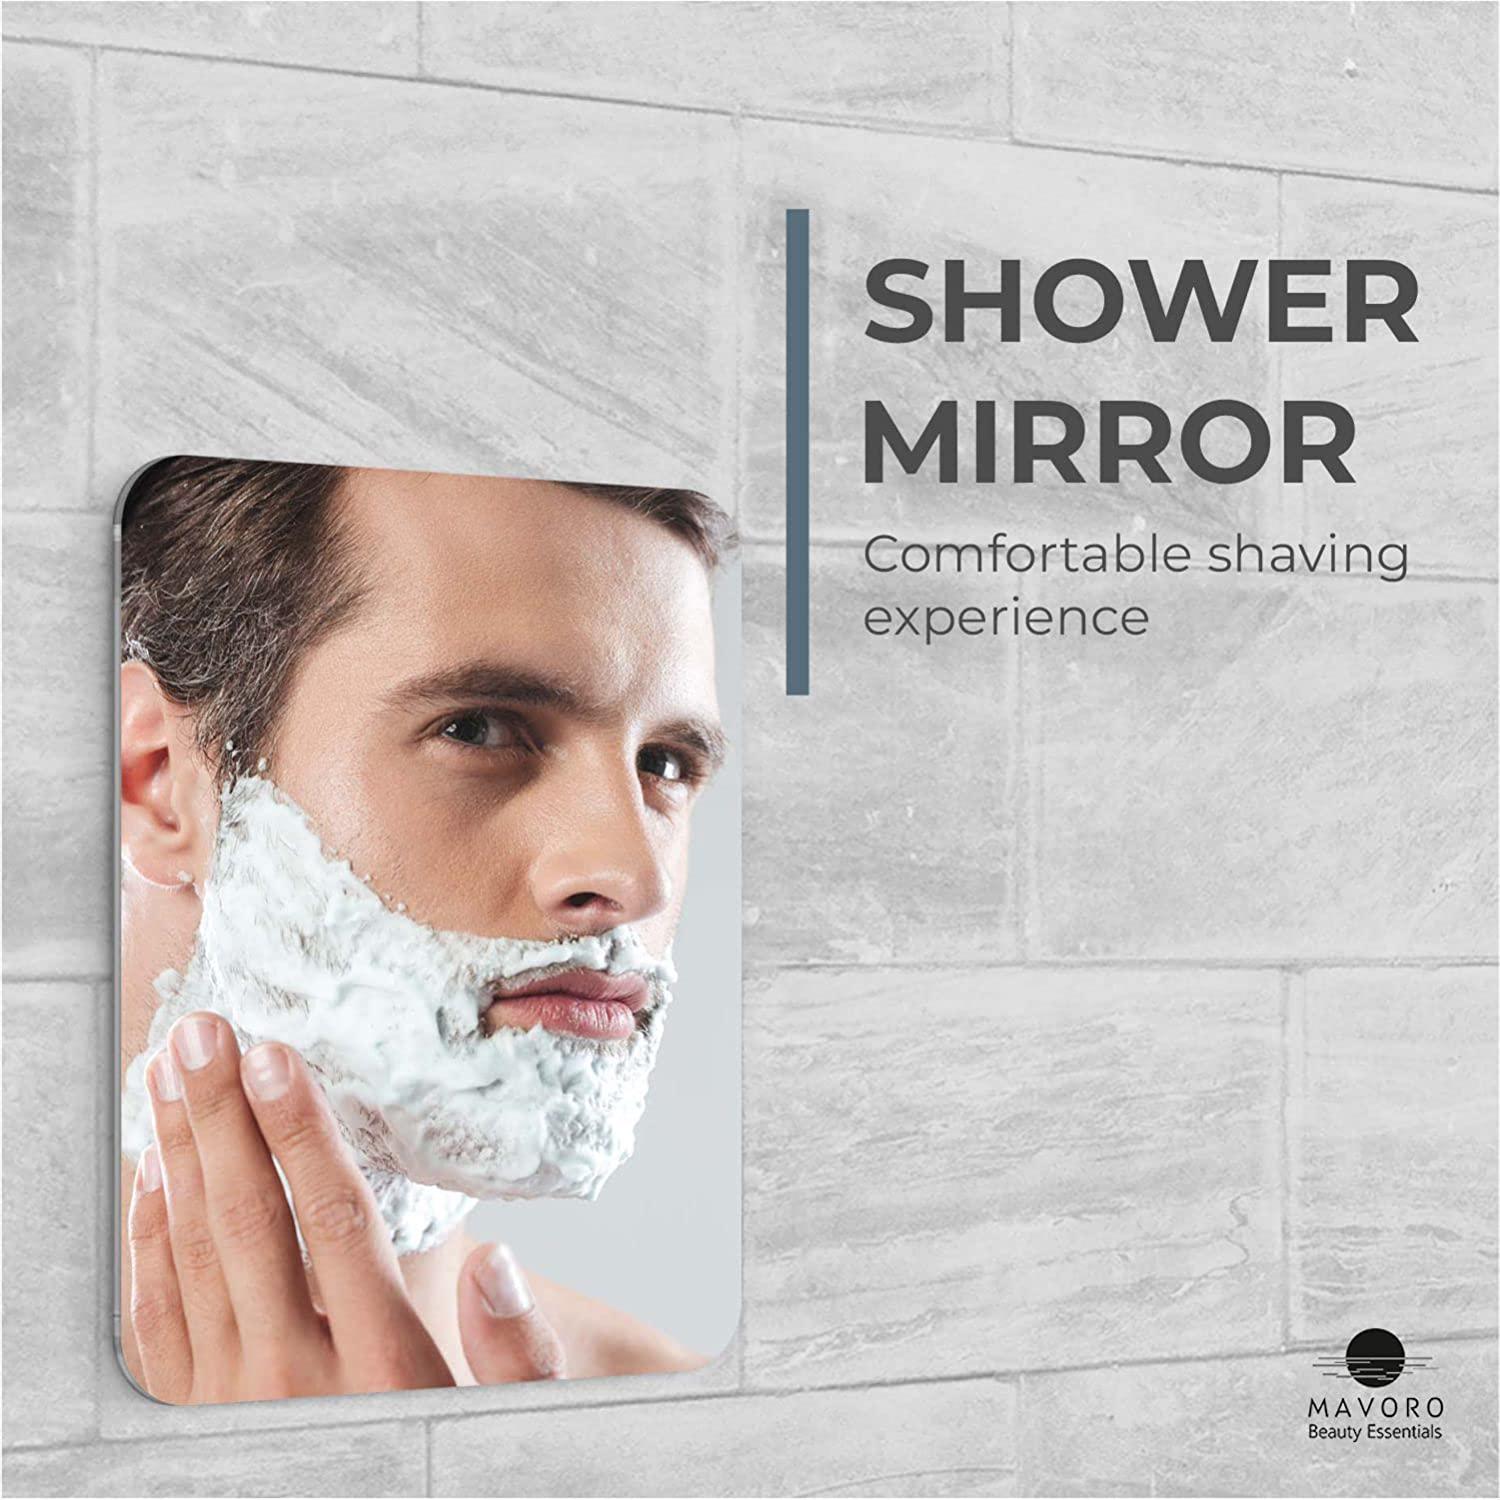 Mavoro Shaving Mirror for Shower - 3M Adhesive Shower Mirror. 7x9in Acrylic  Mirror - Unbreakable Mirror with Less Fogging. Sleek Frameless Mirror. Peel  and Stick Mirror, Glassless Safety Kids Mirror 1